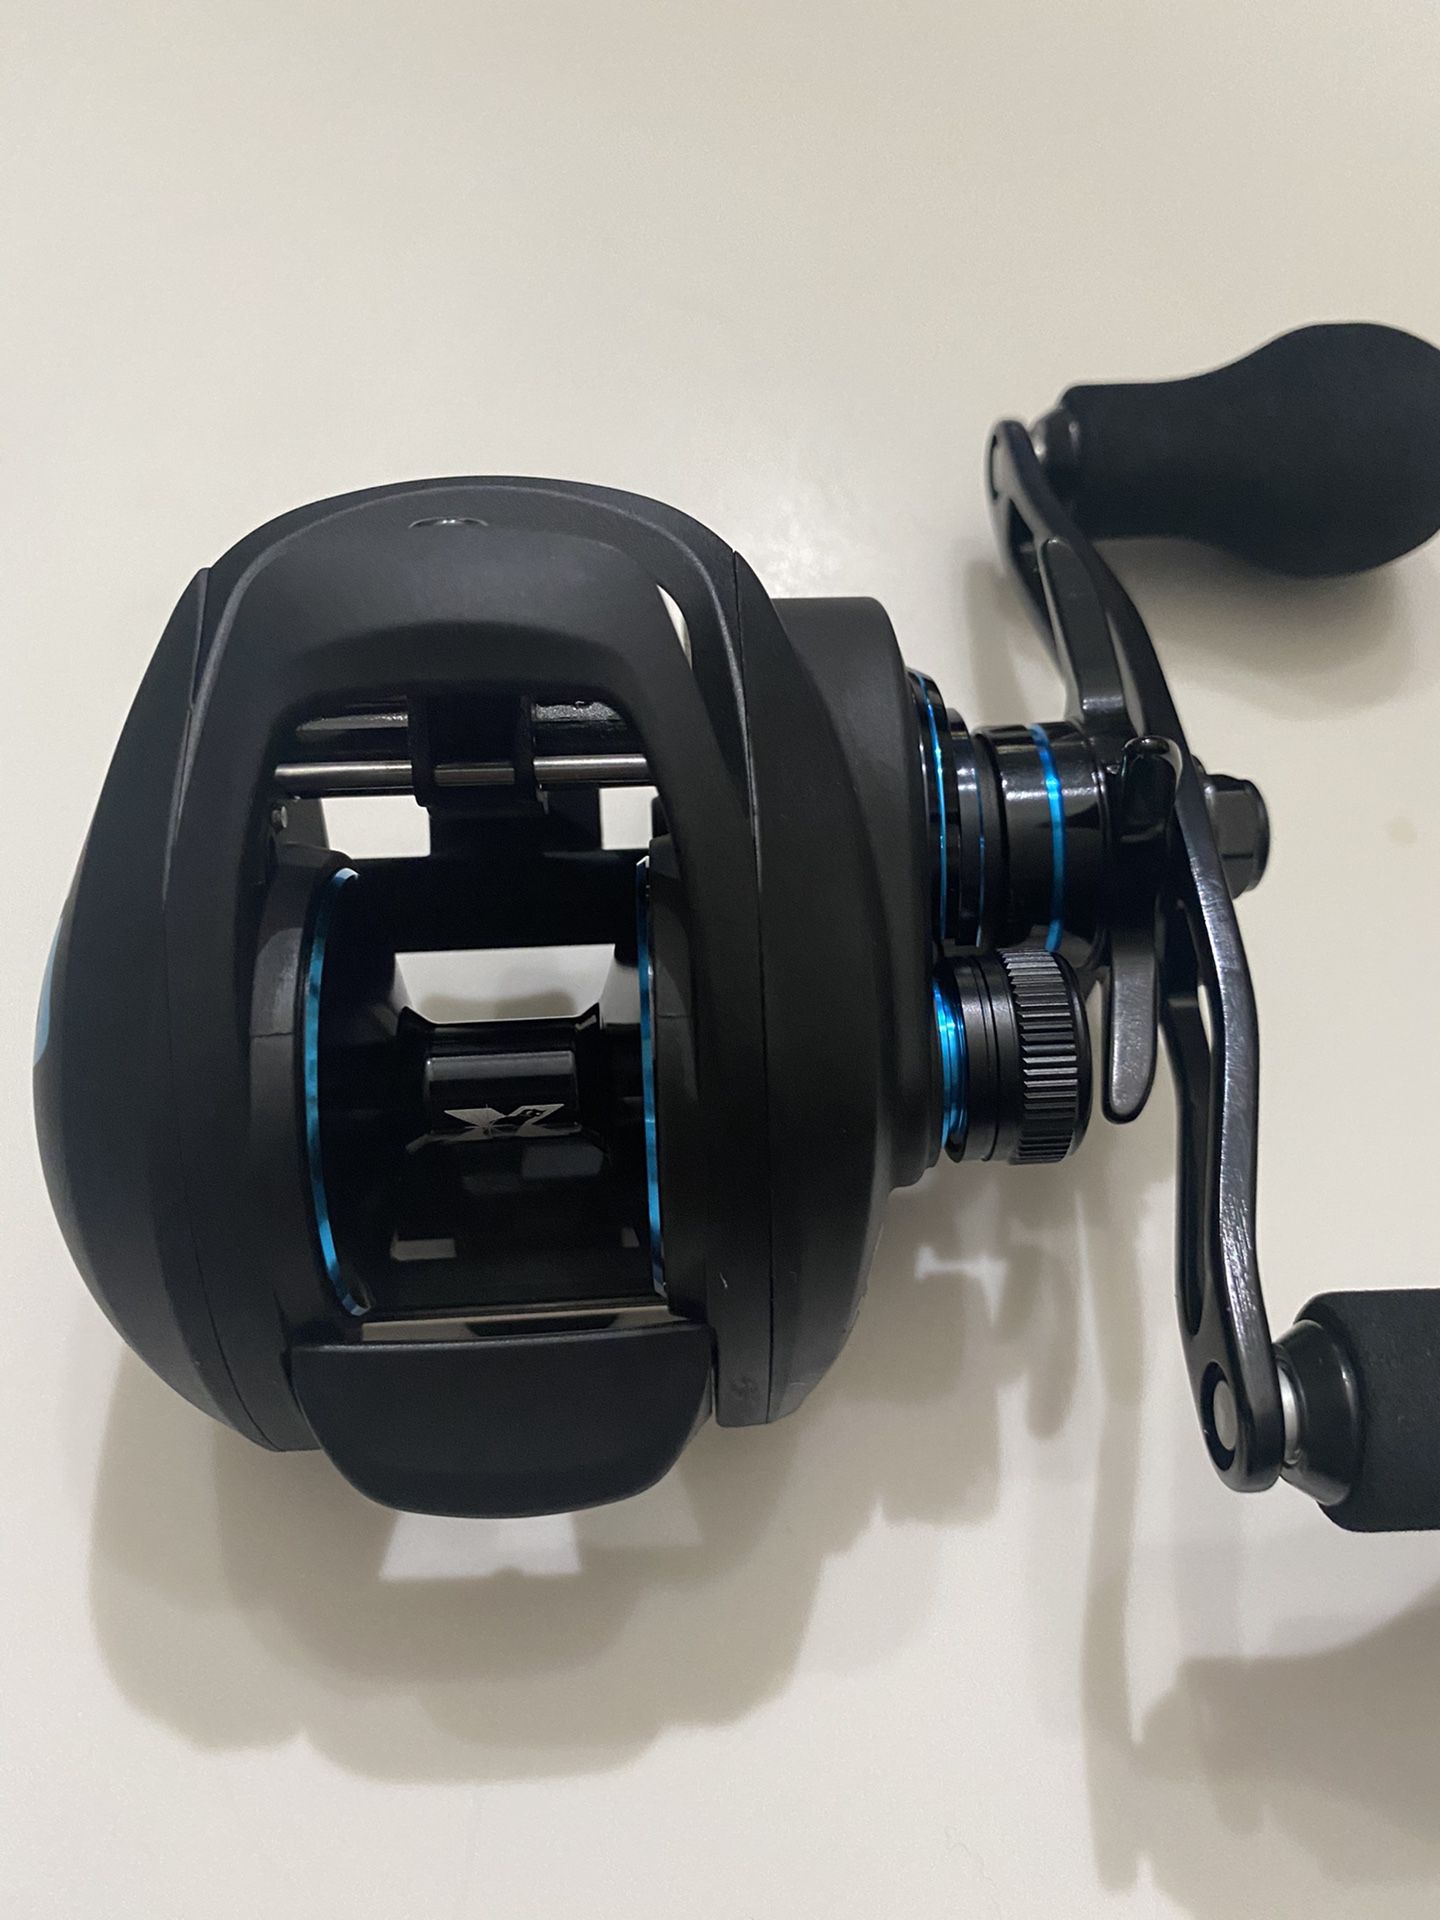 NEW H2O Xpress Ethos HD baitcaster fishing reel for Sale in Alvin